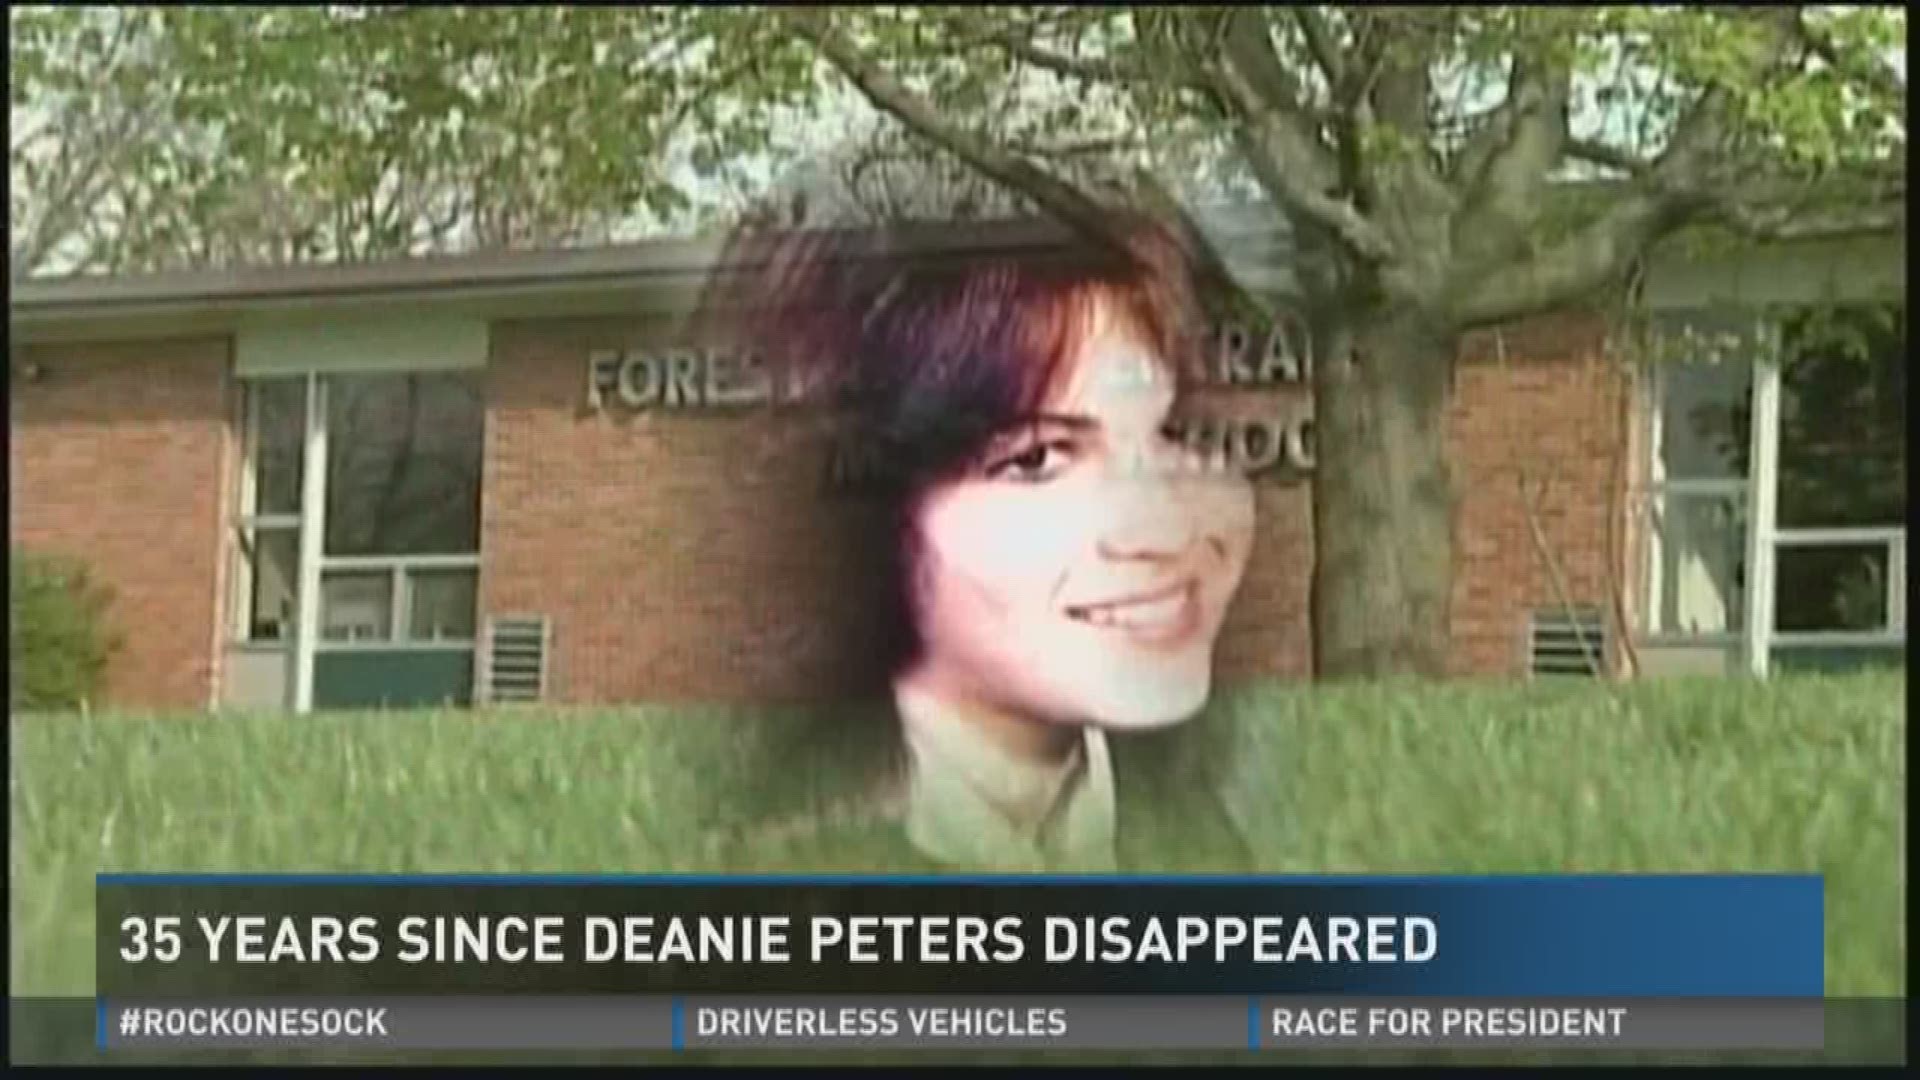 Deanie left the Forest Hills Central Middle School gymnasium to use the restroom. Nobody then and nobody now -- more than 35 years later -- claims to know what happened to her.